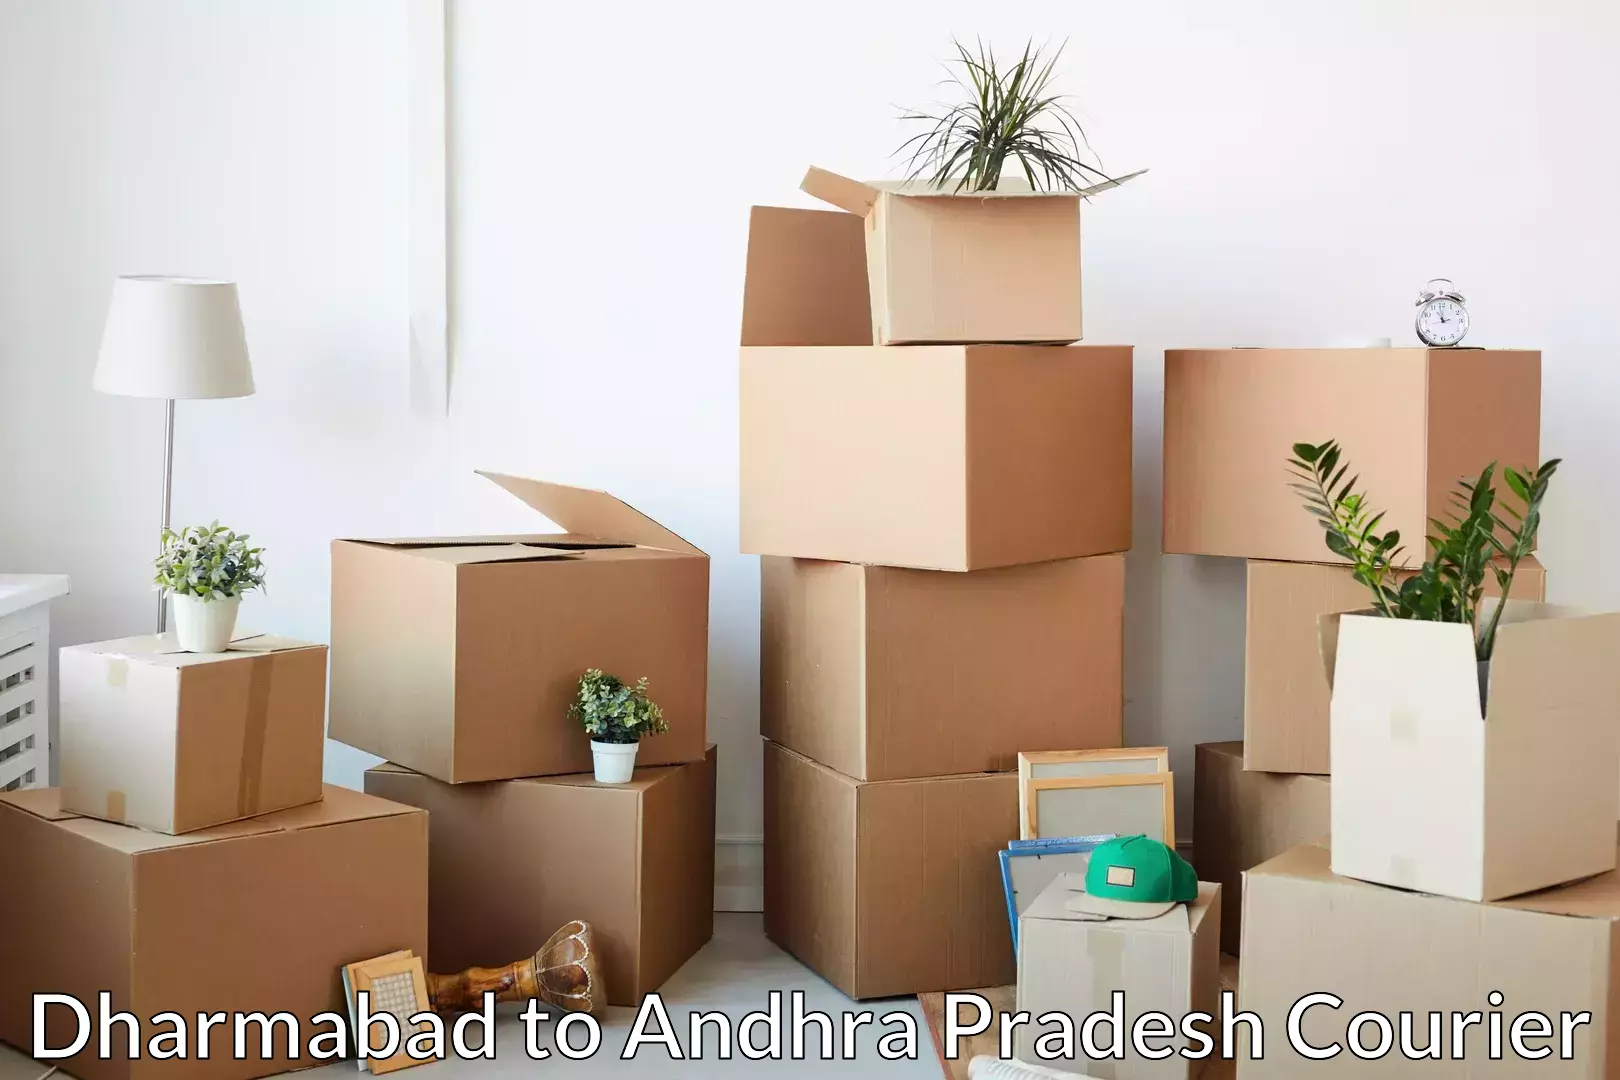 Budget-friendly moving services Dharmabad to Visakhapatnam Port